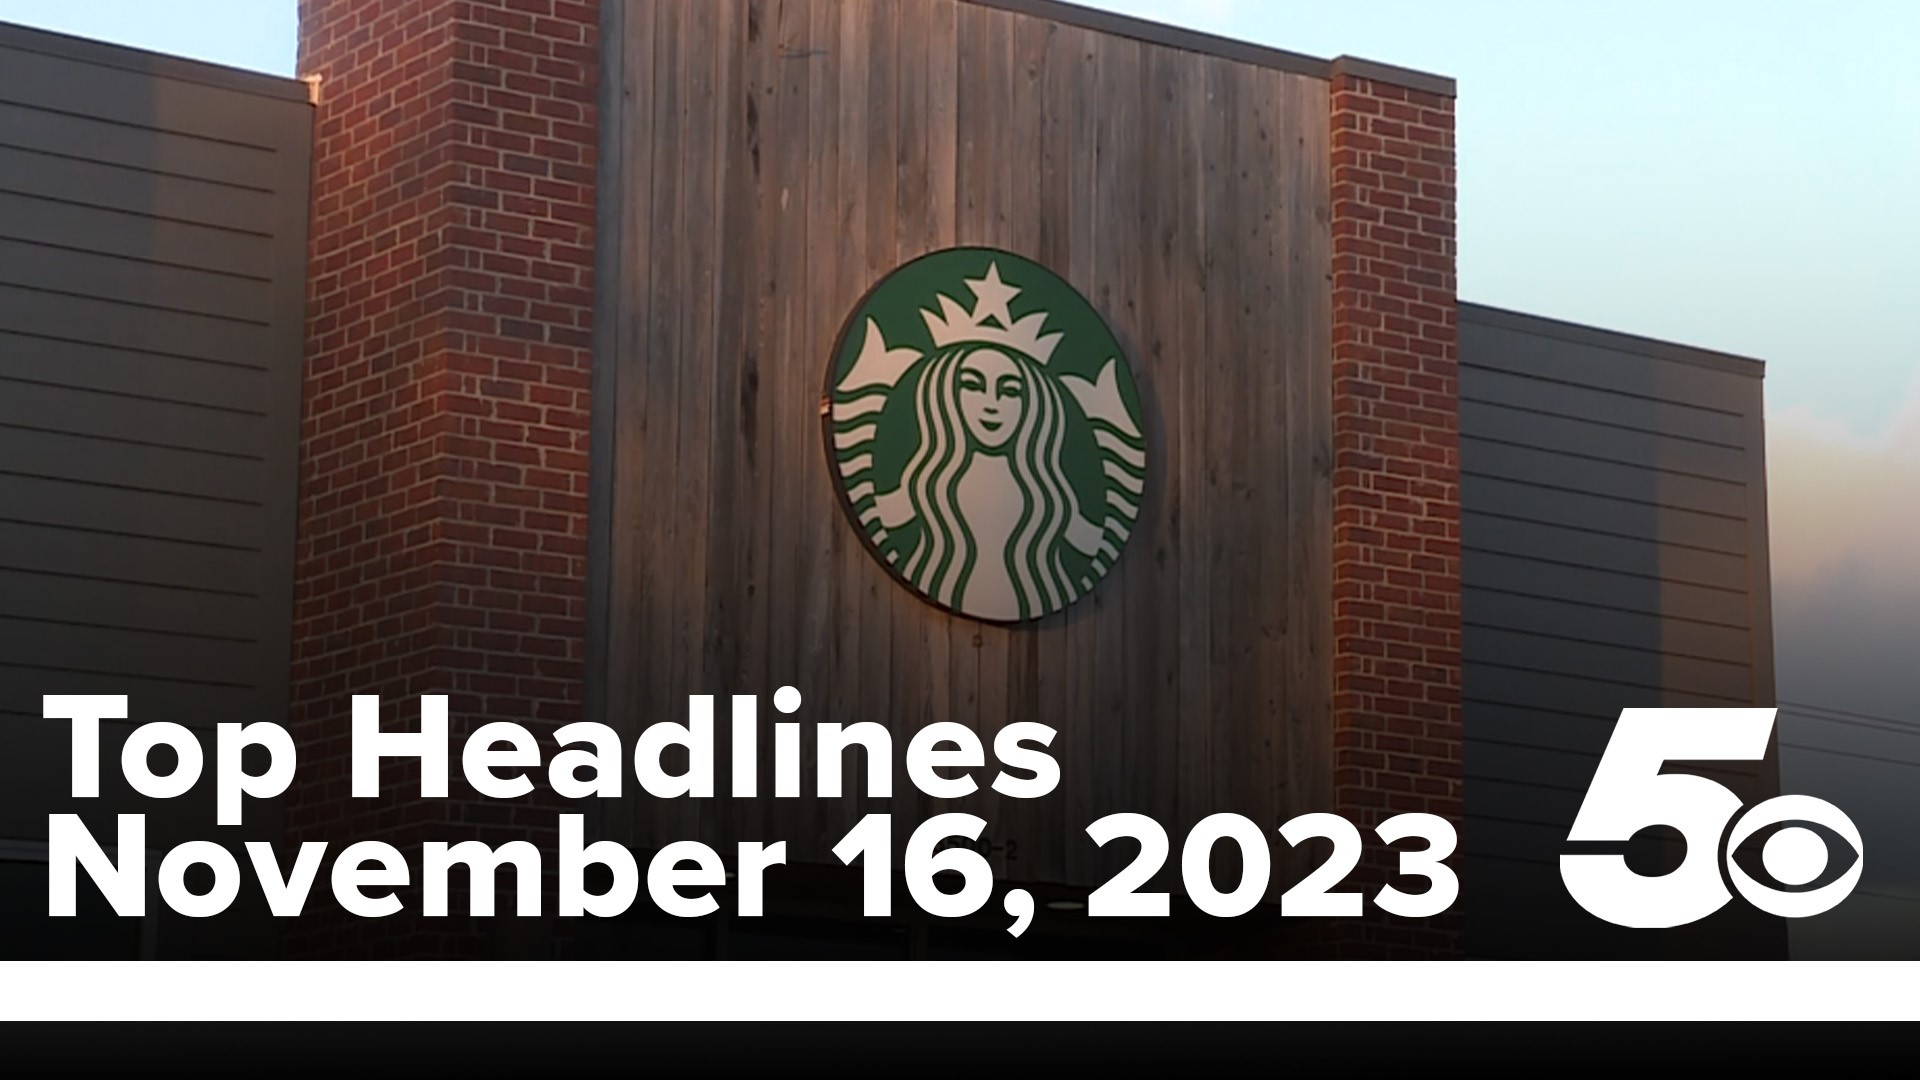 Starbucks workers in Fayetteville have decided to join a nationwide strike, according to a press release. Find out why on your 5NEWS Top Headlines.